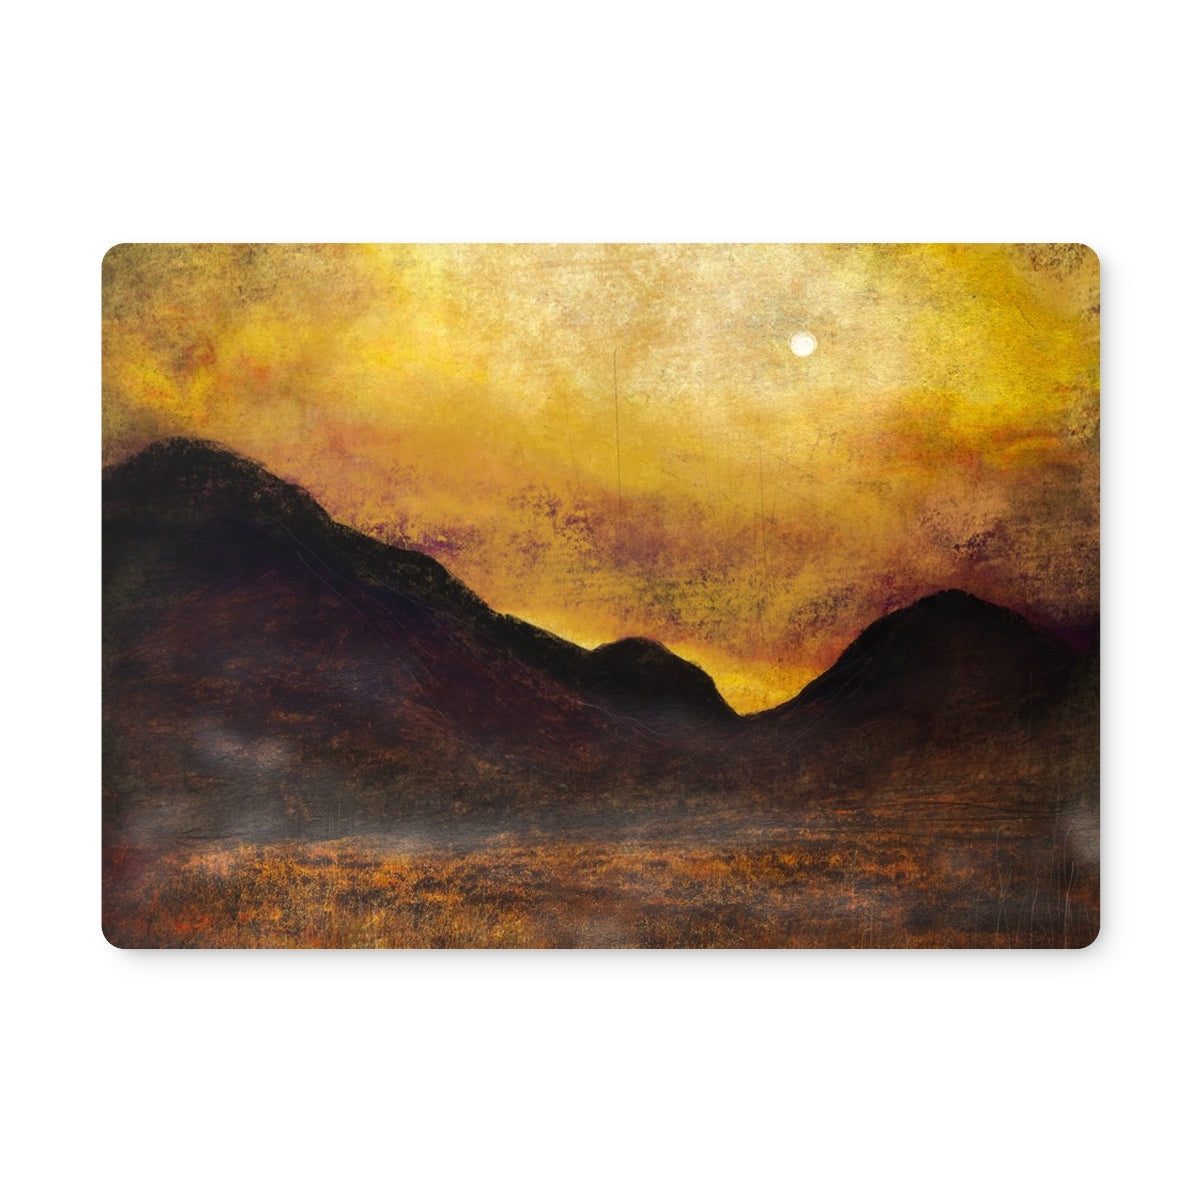 Glencoe Moonlight Art Gifts Placemat-Placemats-Glencoe Art Gallery-Single Placemat-Paintings, Prints, Homeware, Art Gifts From Scotland By Scottish Artist Kevin Hunter